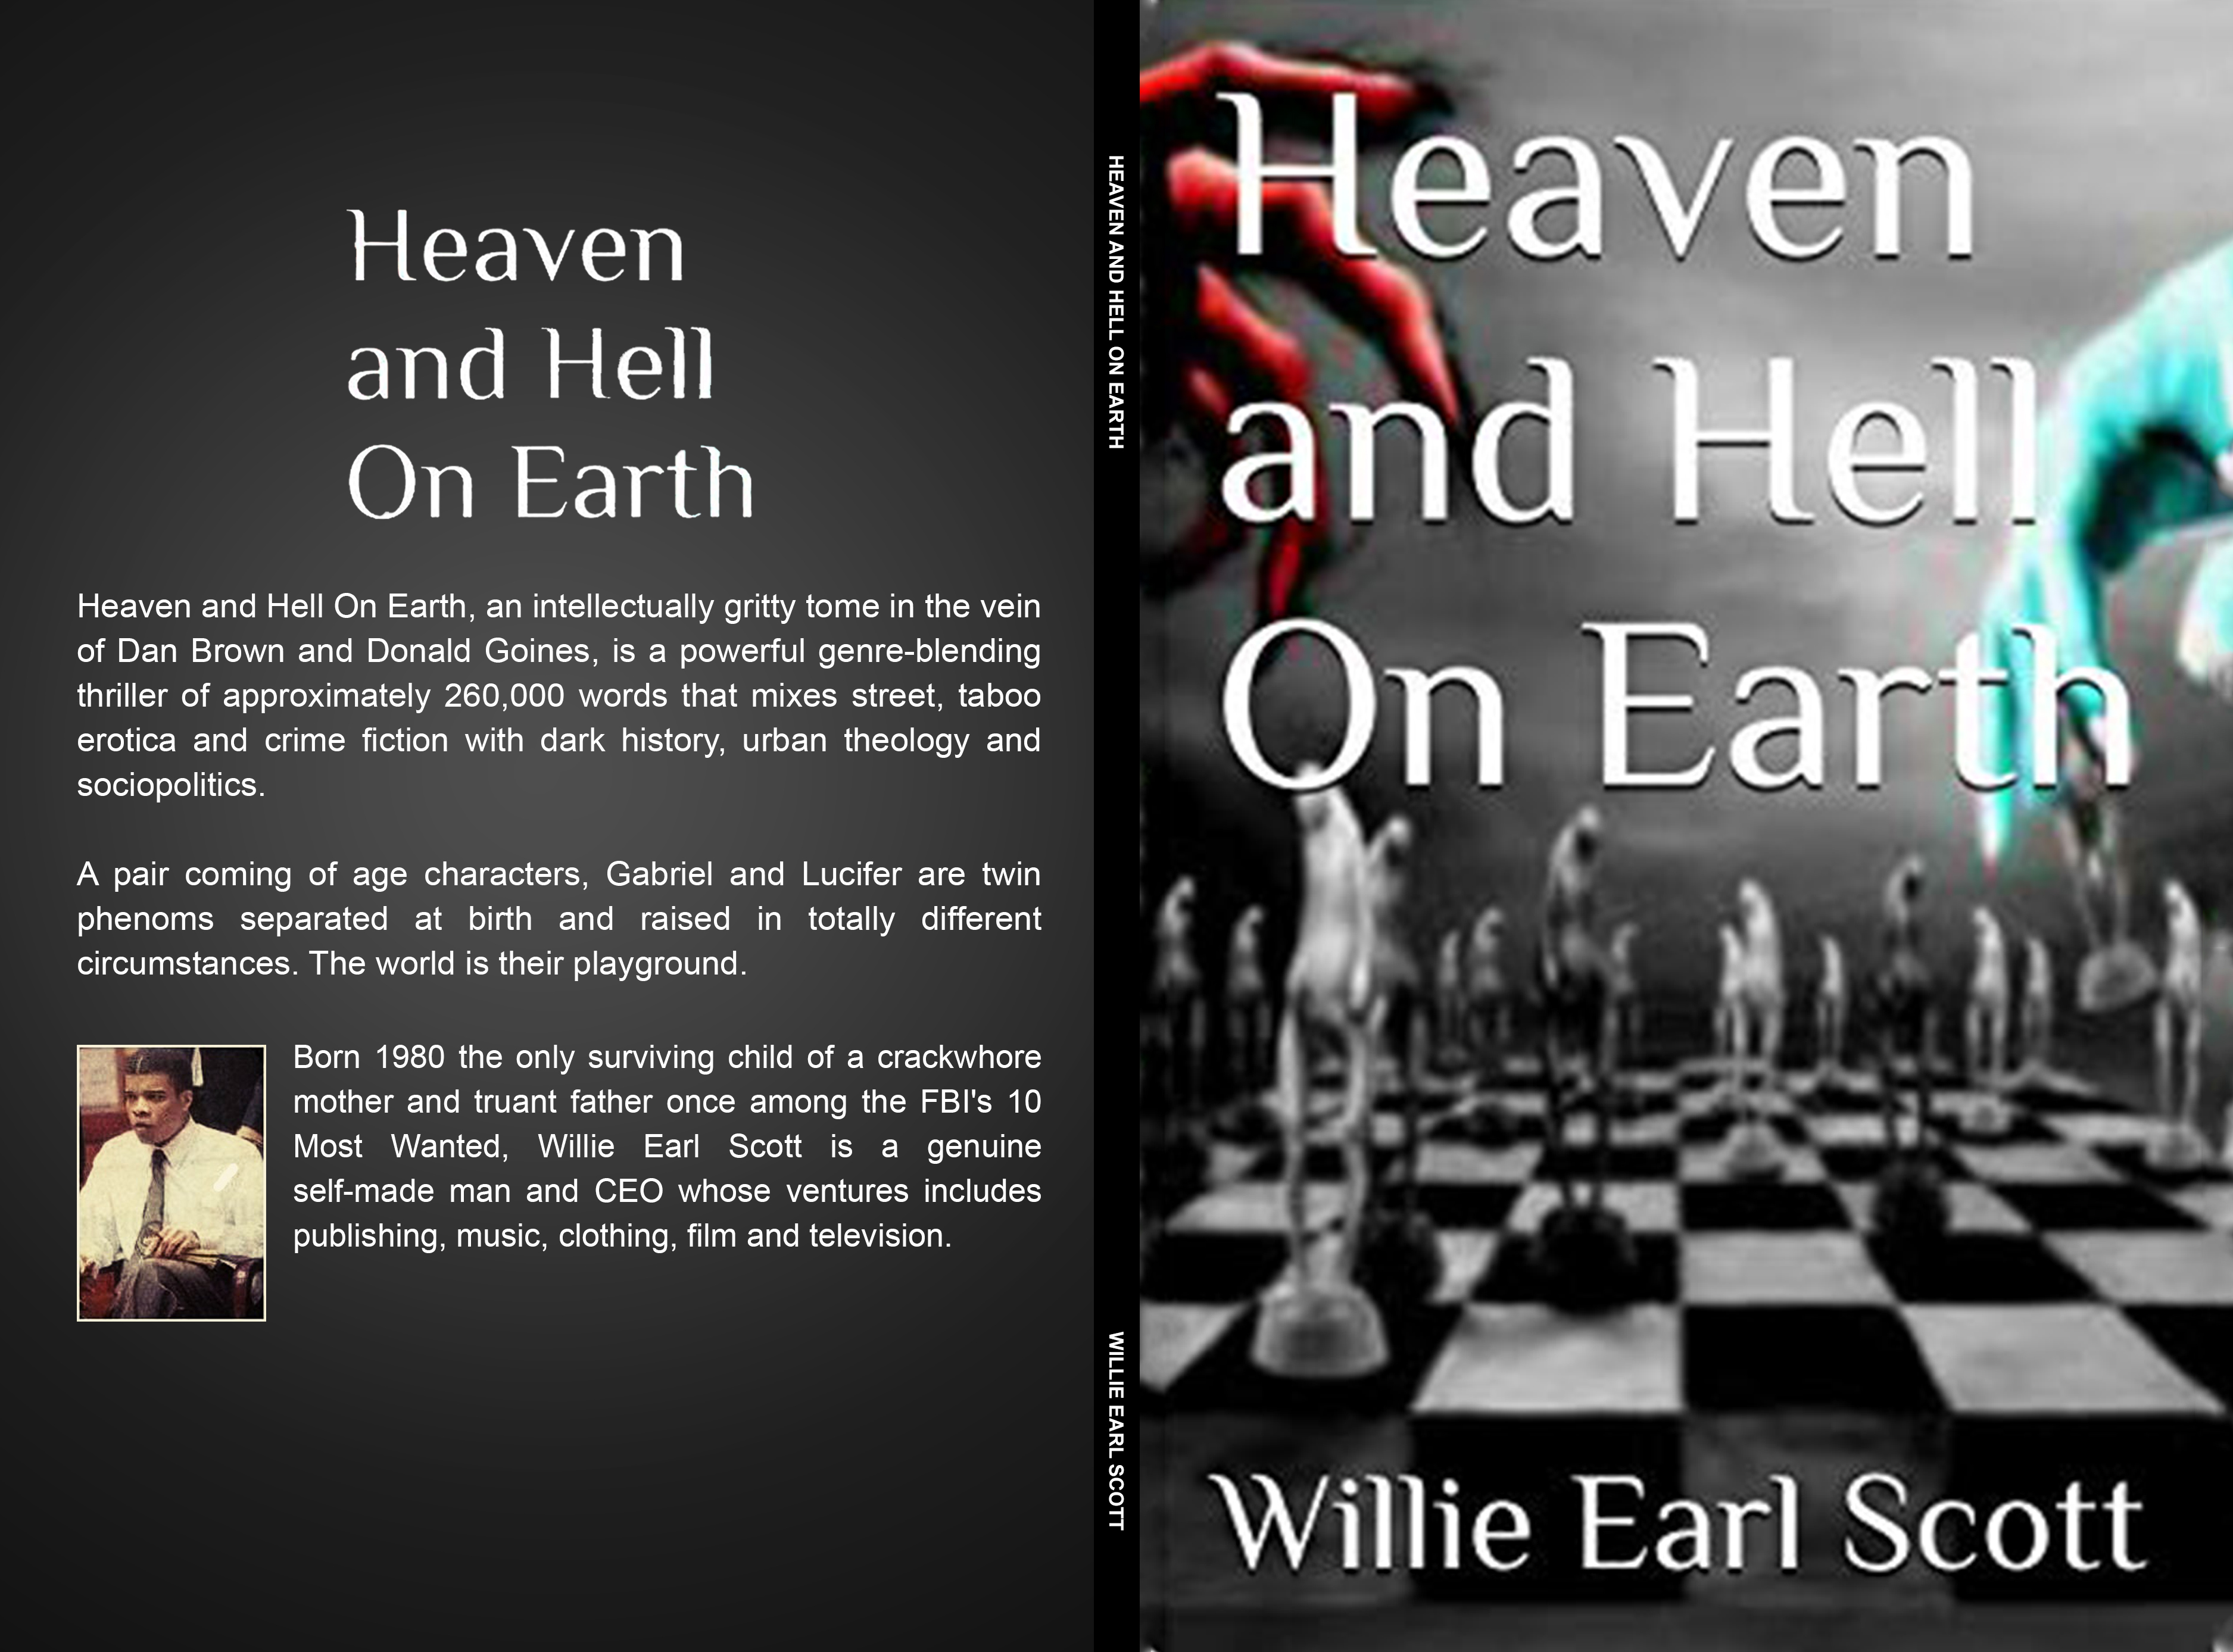 HEAVEN AND HELL ON EARTH